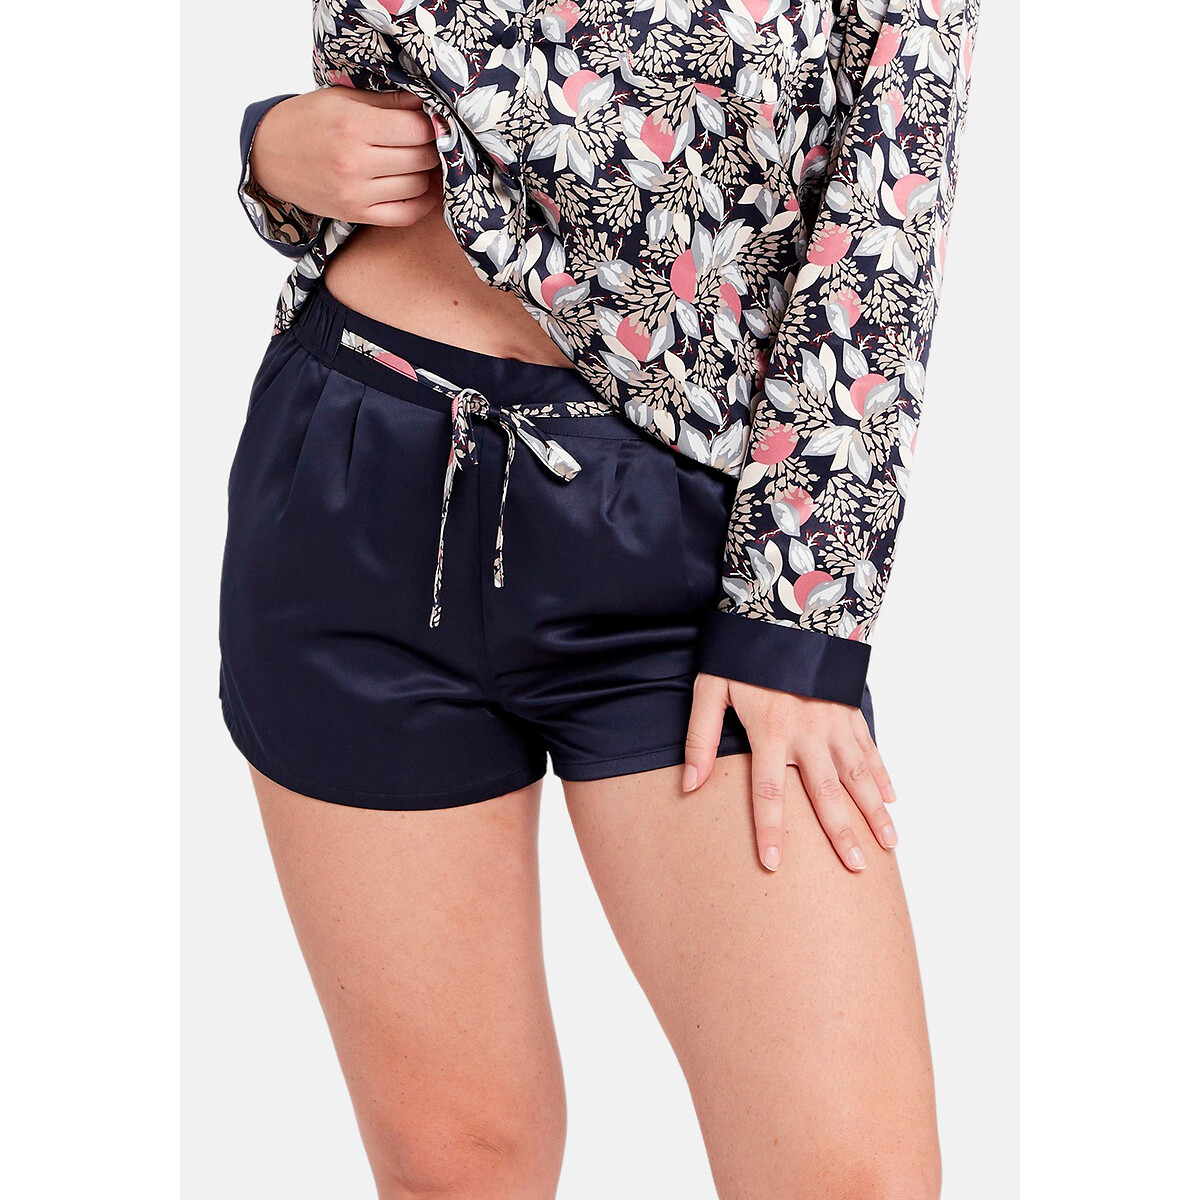 In Style Pyjama Shorts with High Waist